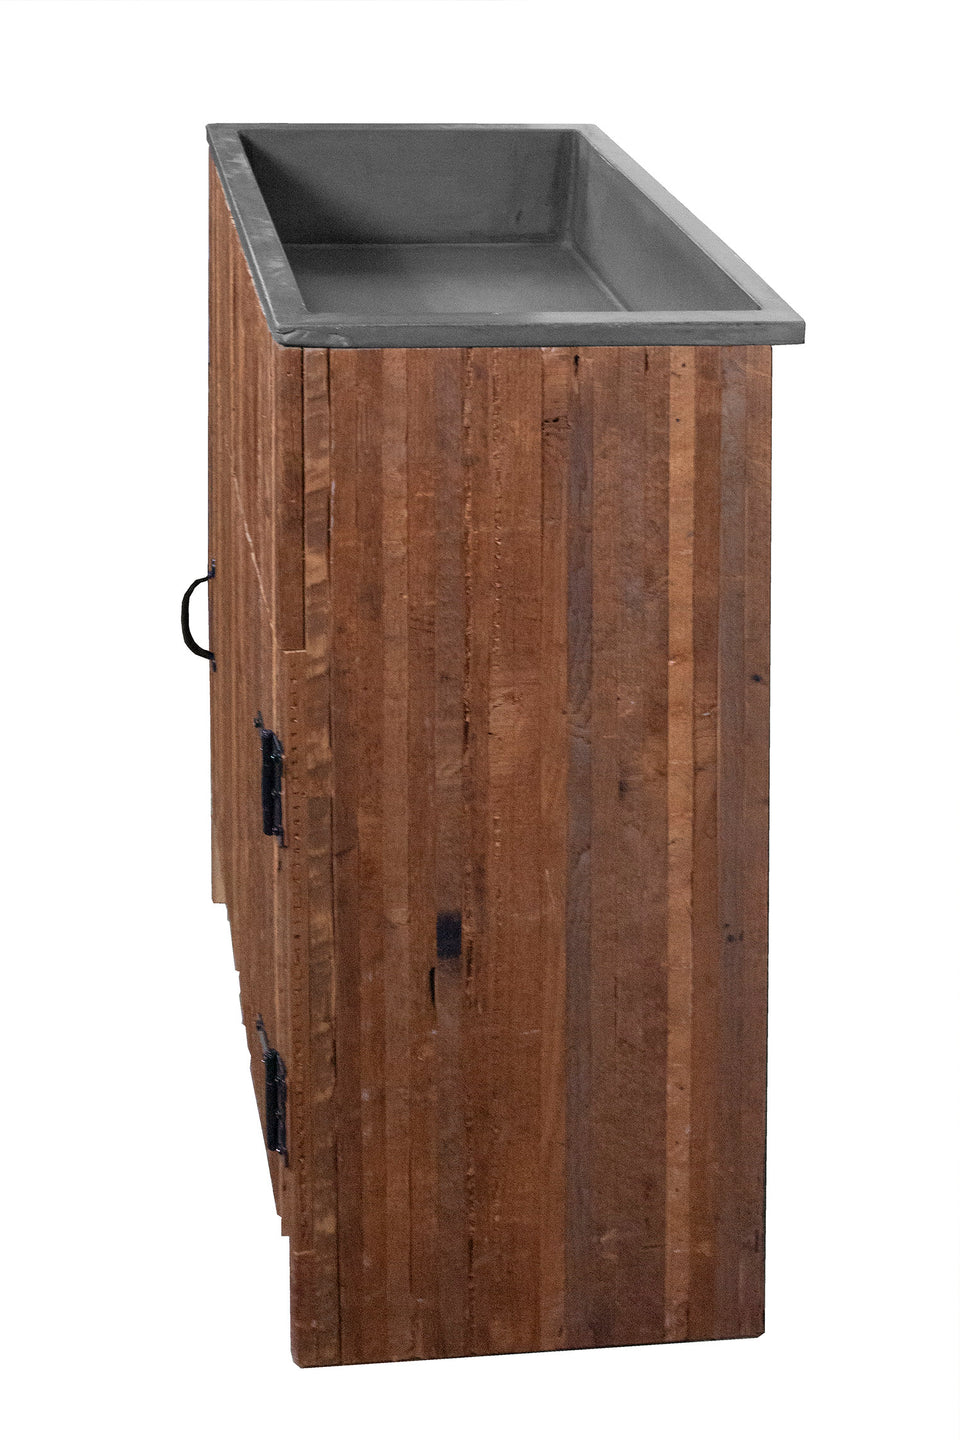 As Is! Rustic Concrete and Wood Pedestal Farm Sink